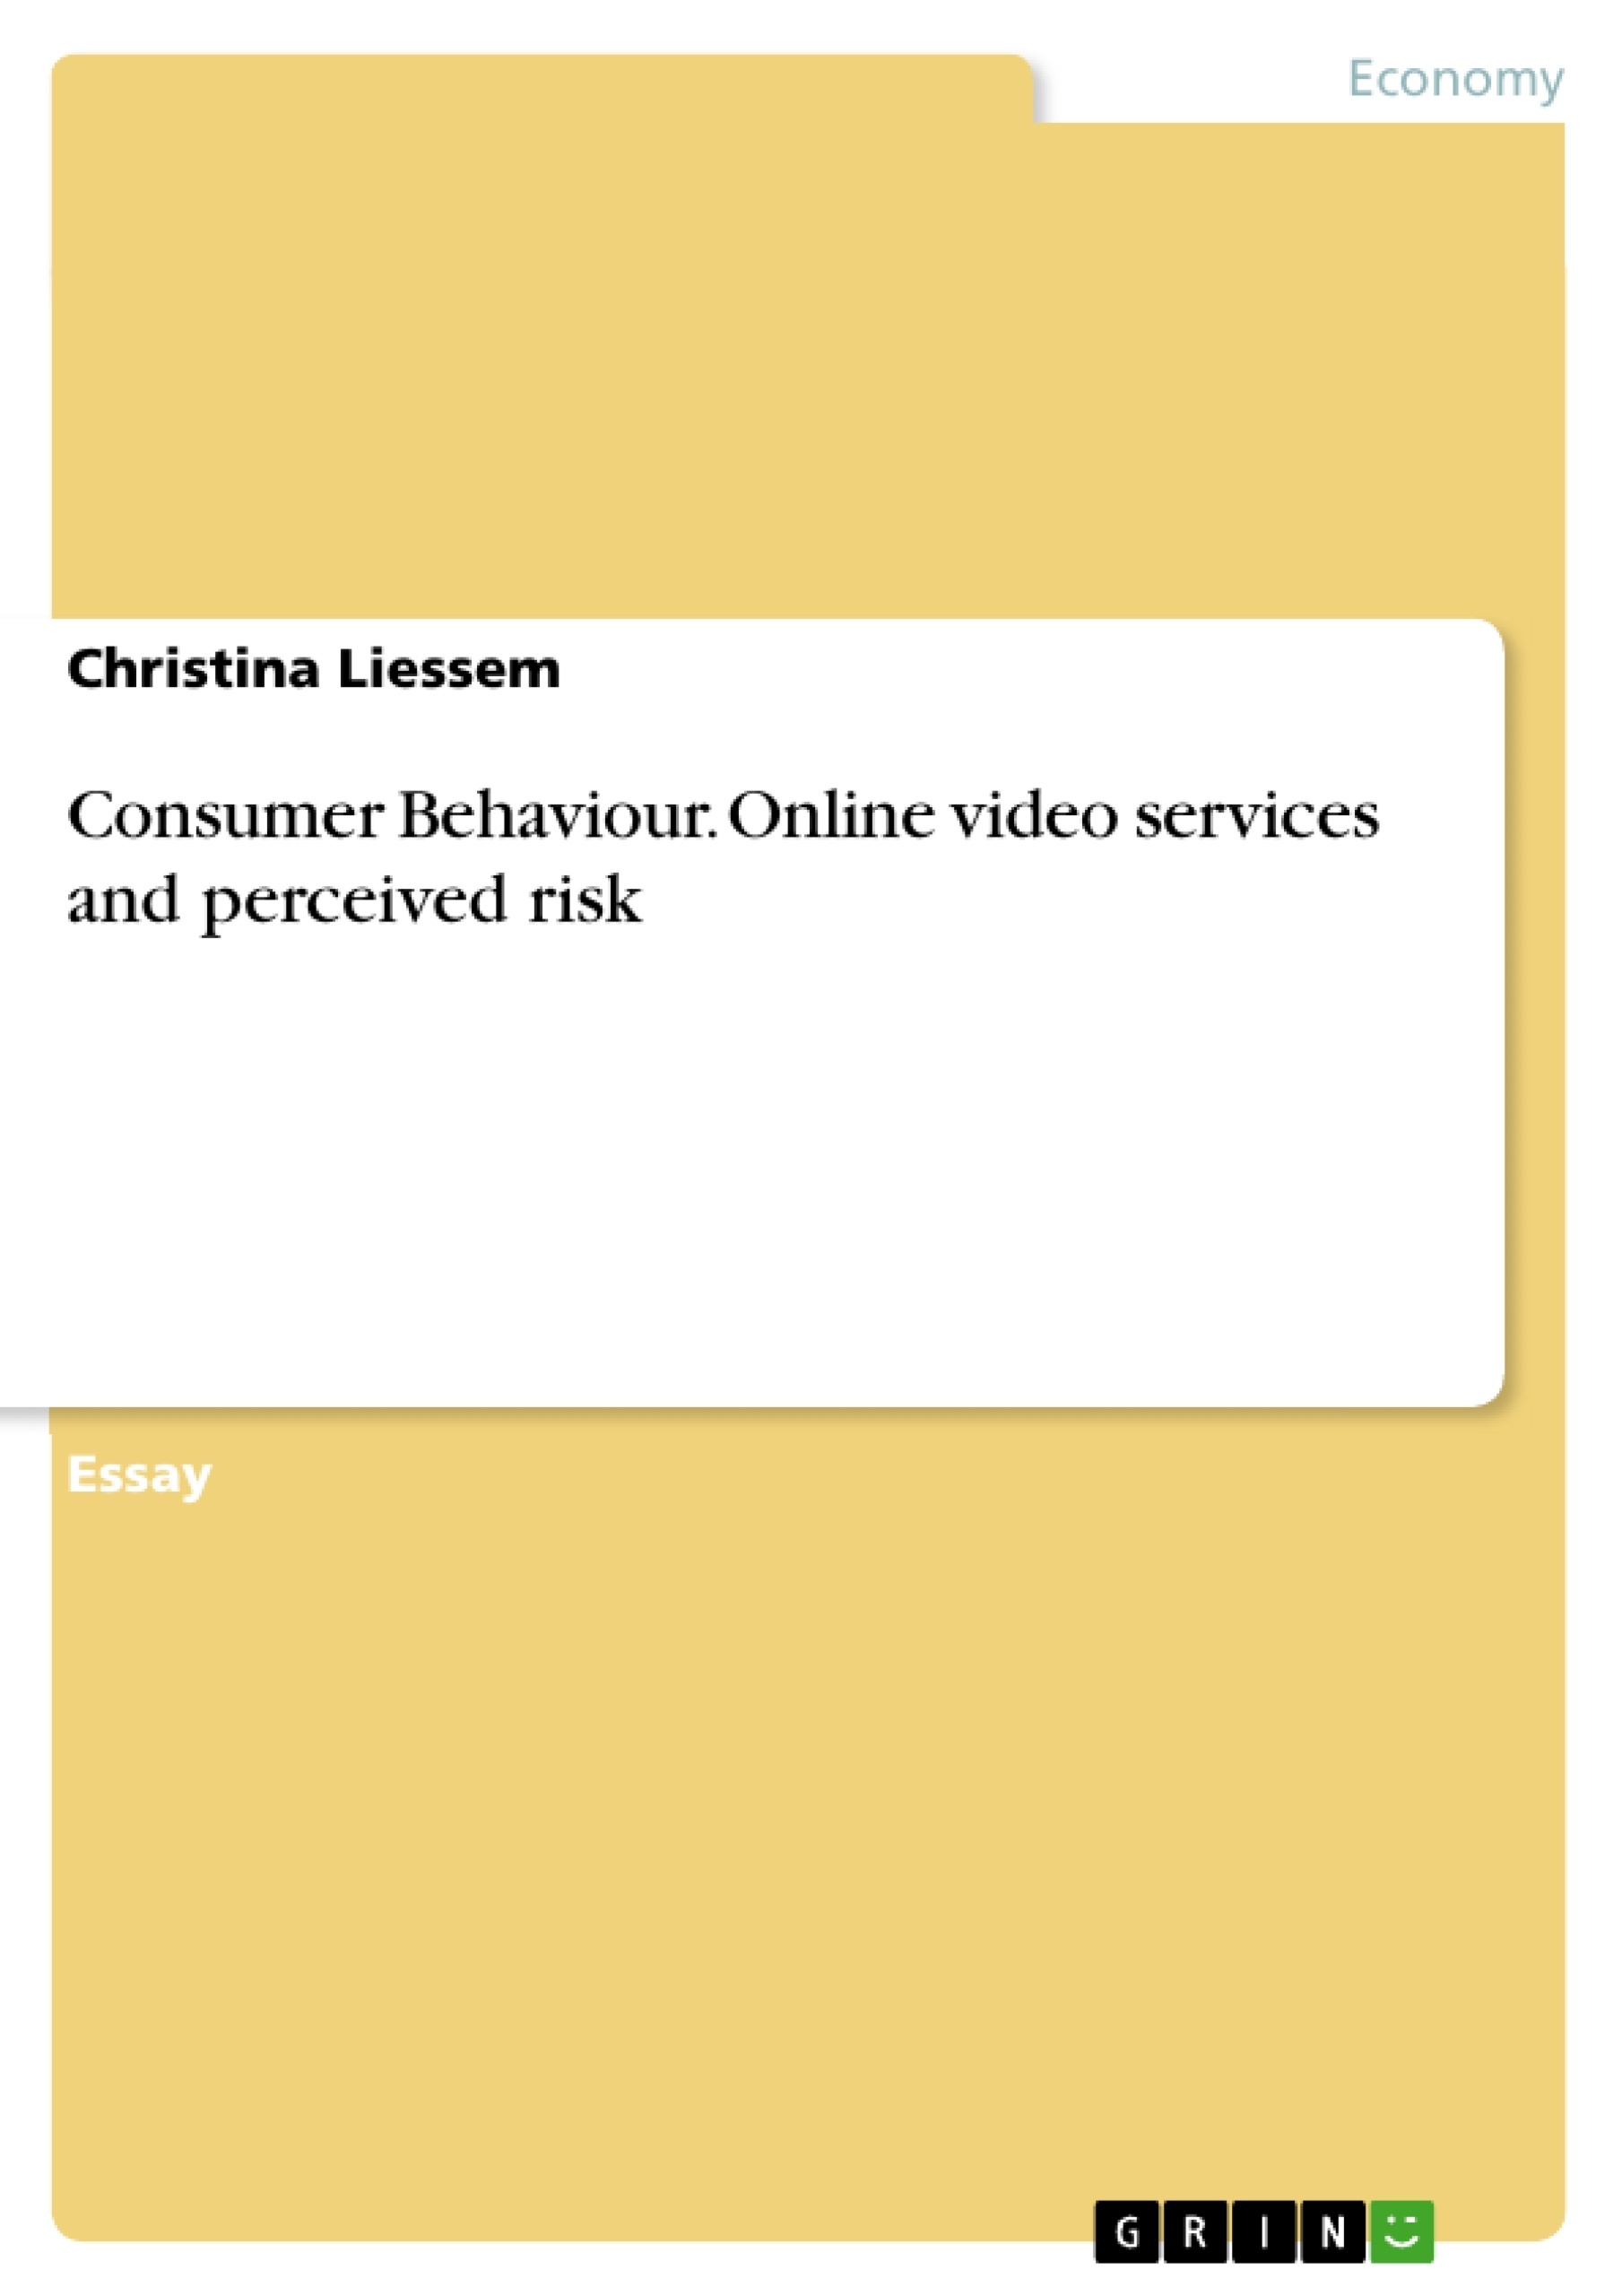 Title: Consumer Behaviour. Online video services and perceived risk